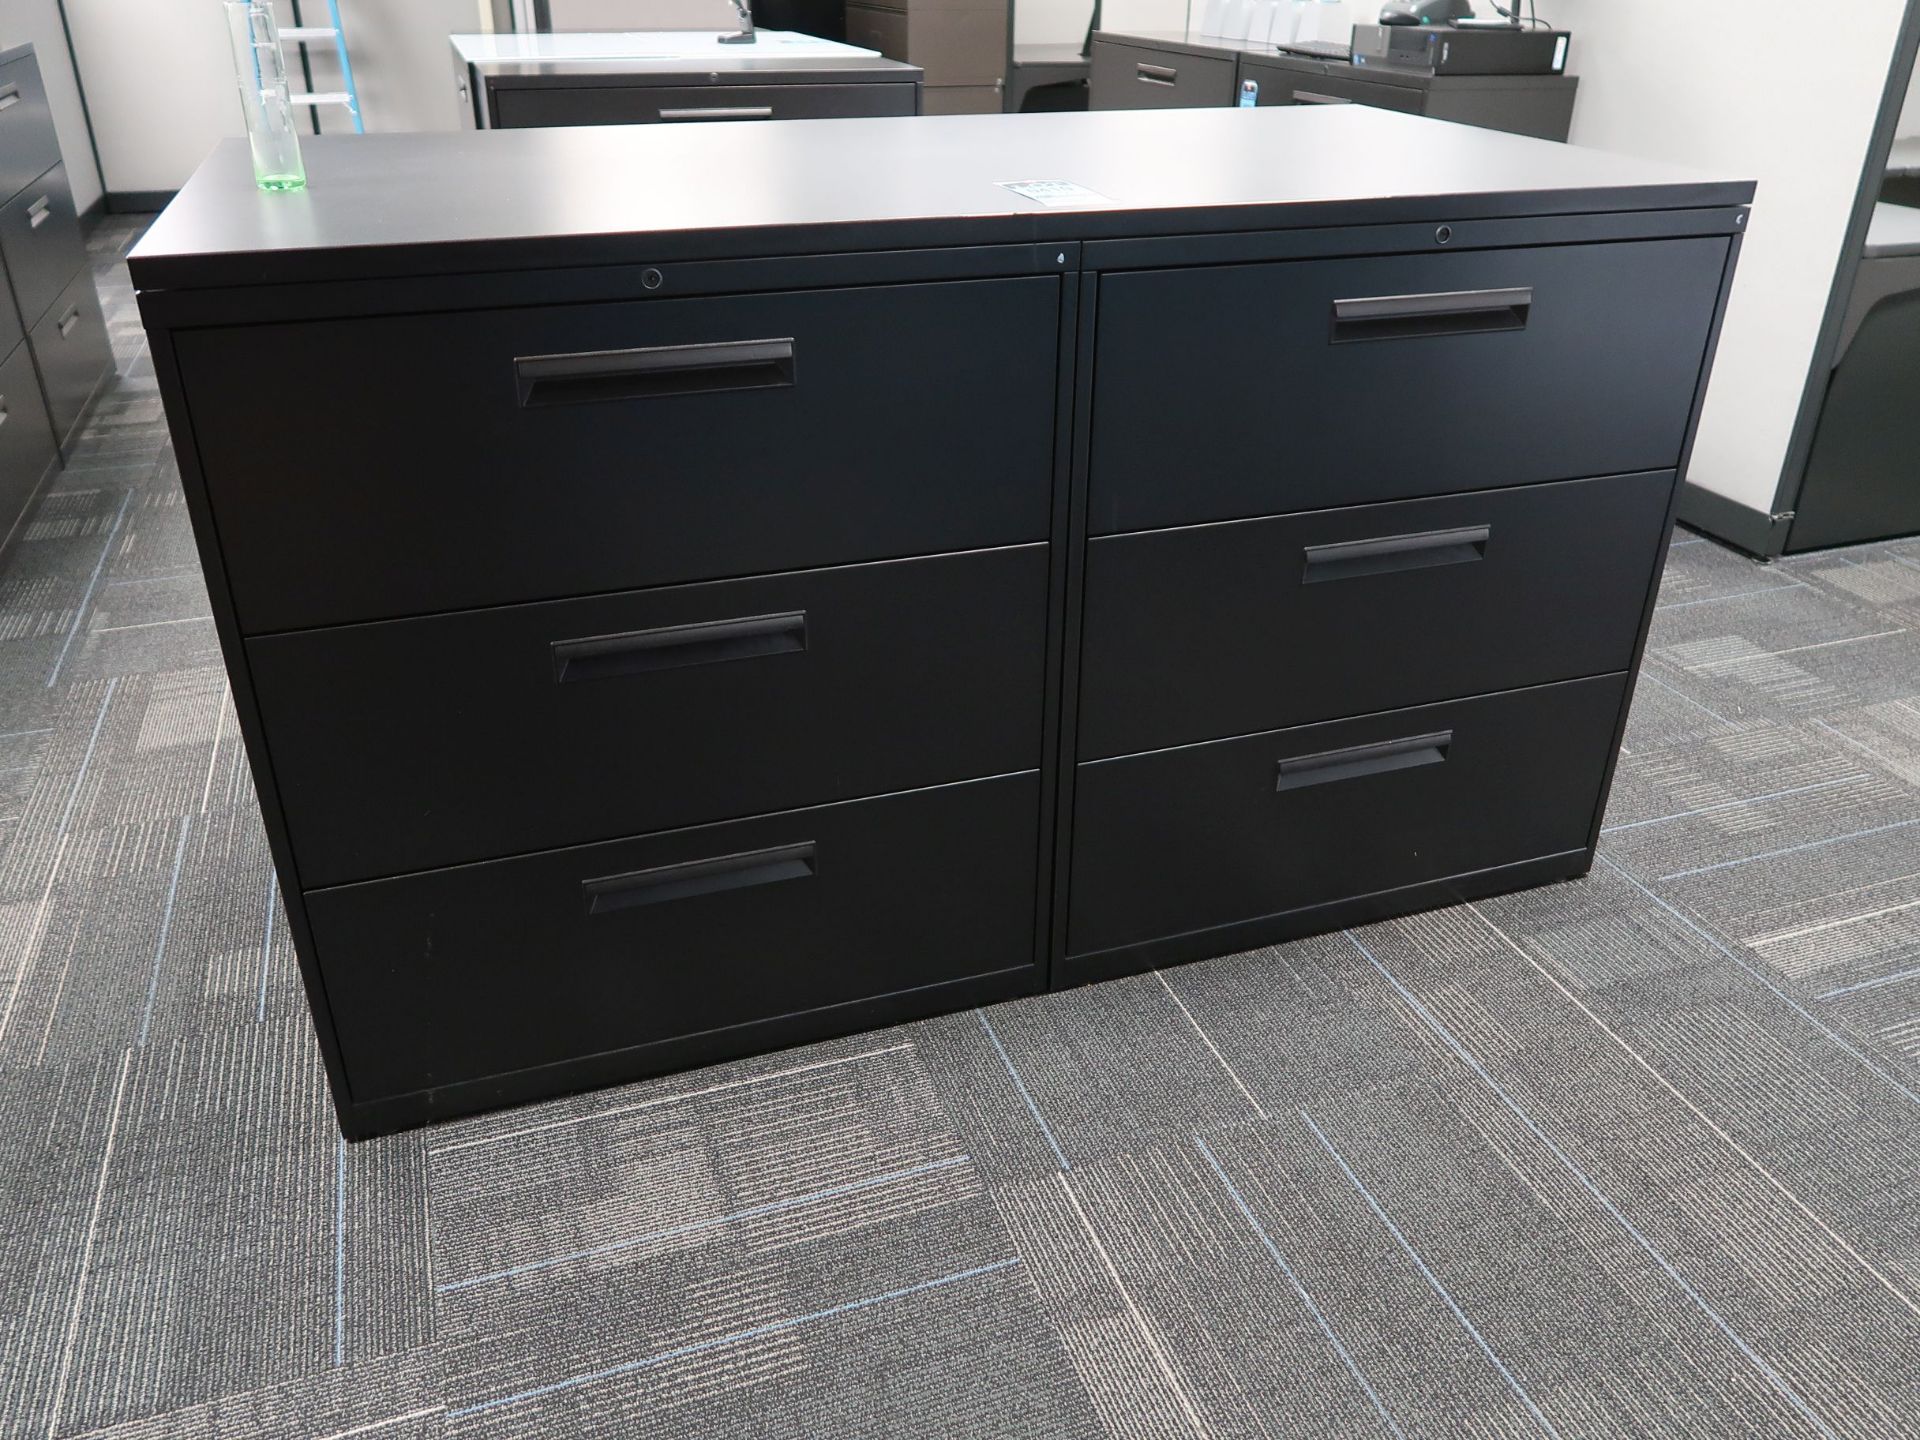 36" WIDE BLACK THREE-DRAWER LATERAL FILE CABINETS W/ 36" X 72" LAMINATED COMMON TOP